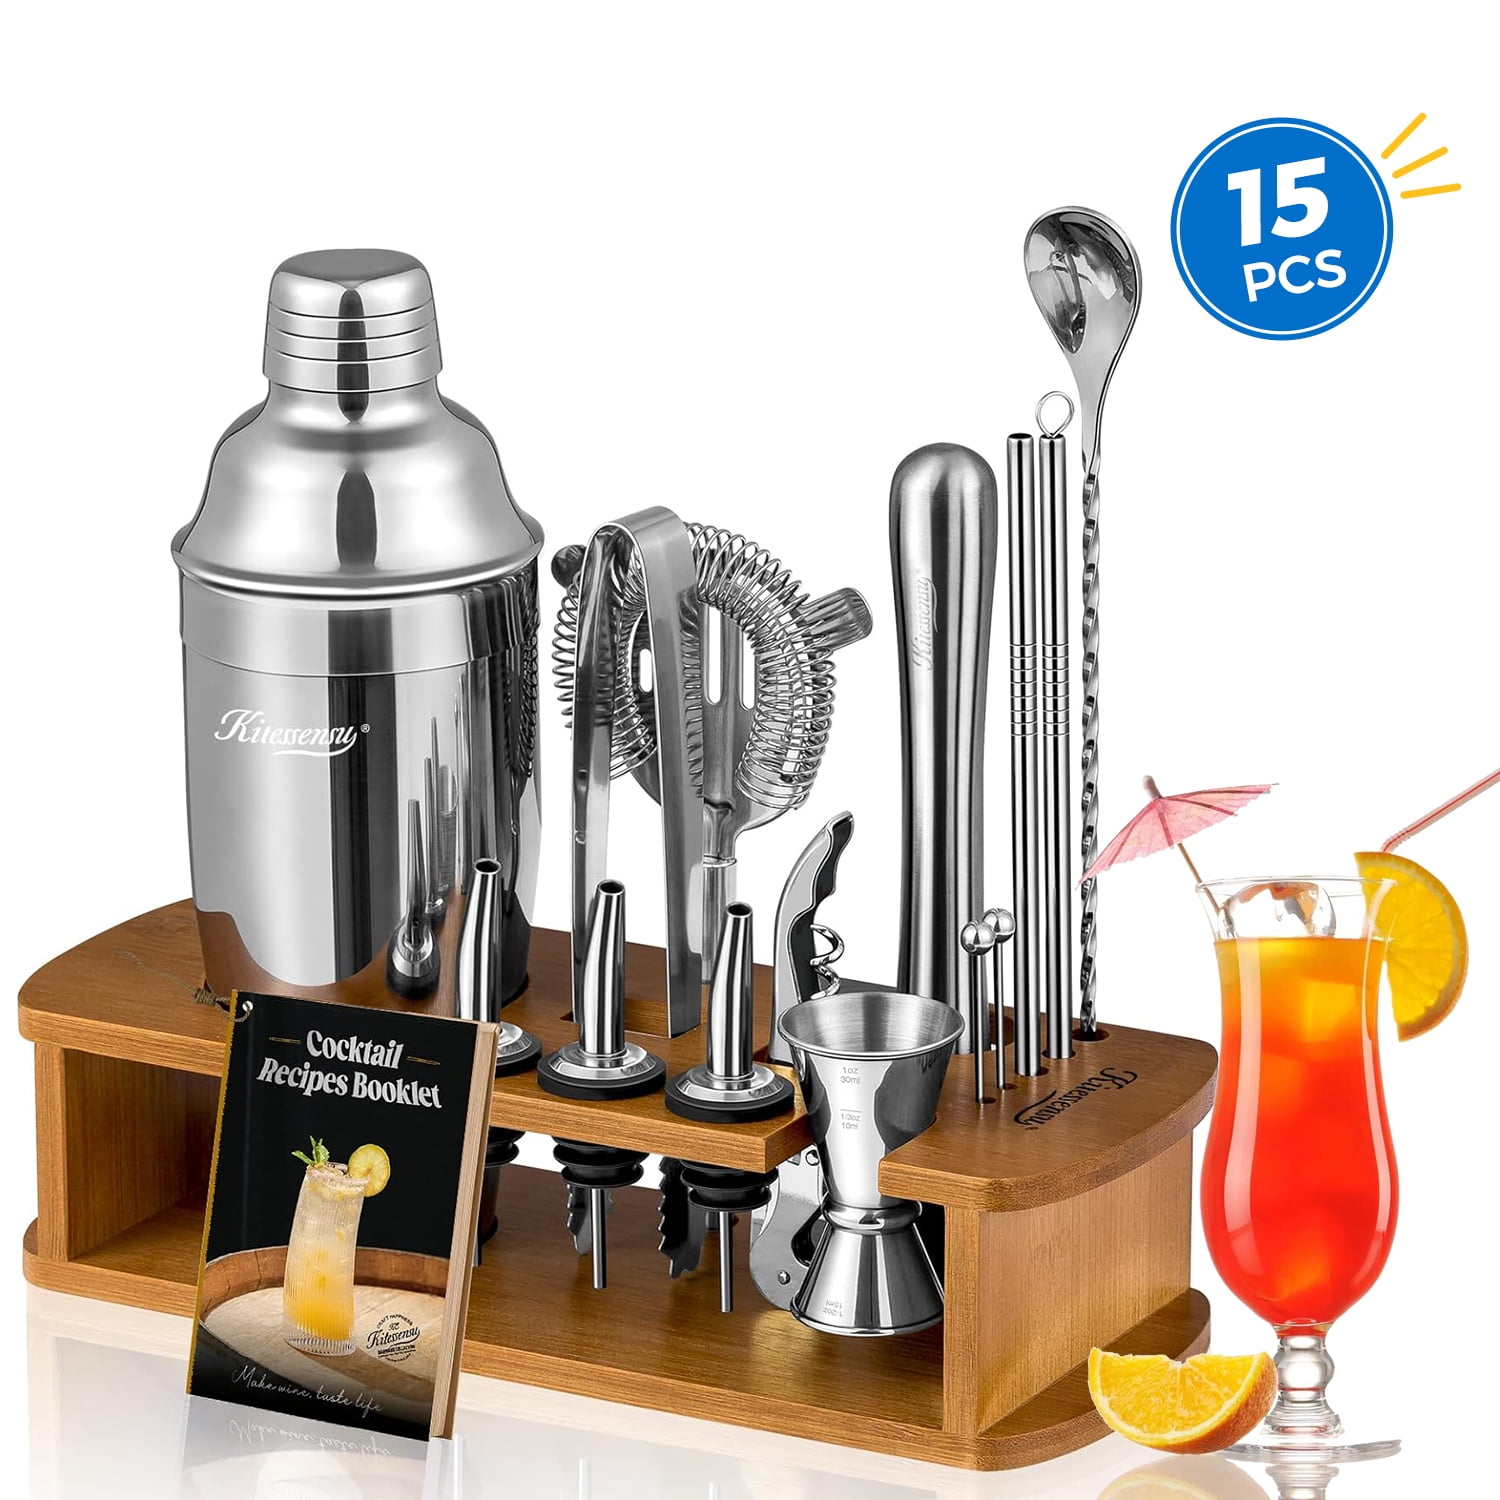 KITESSENSU Bartender Kit, 15-Piece Cocktail Shaker Set with Bamboo Stand,  Drink Mixer Set, Bar Set with All Essential Bar Accessory Tools |Silver